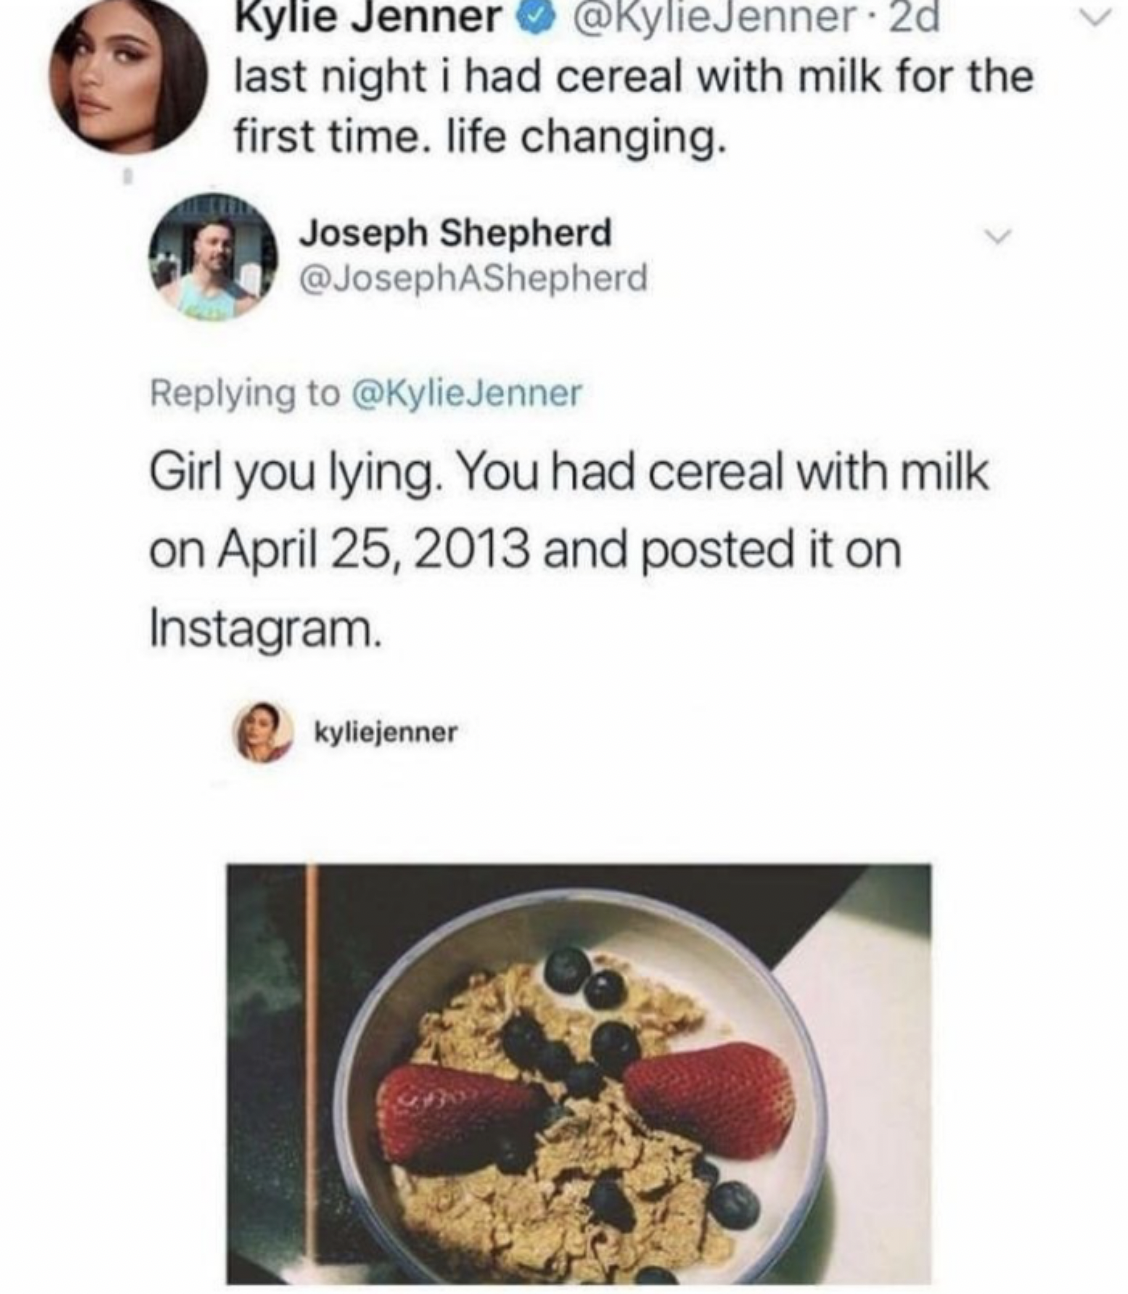 Friday Facepalms and Fails - kylie jenner cereal with milk - Kylie Jenner  last night i had cereal with milk for the first time. life changing.